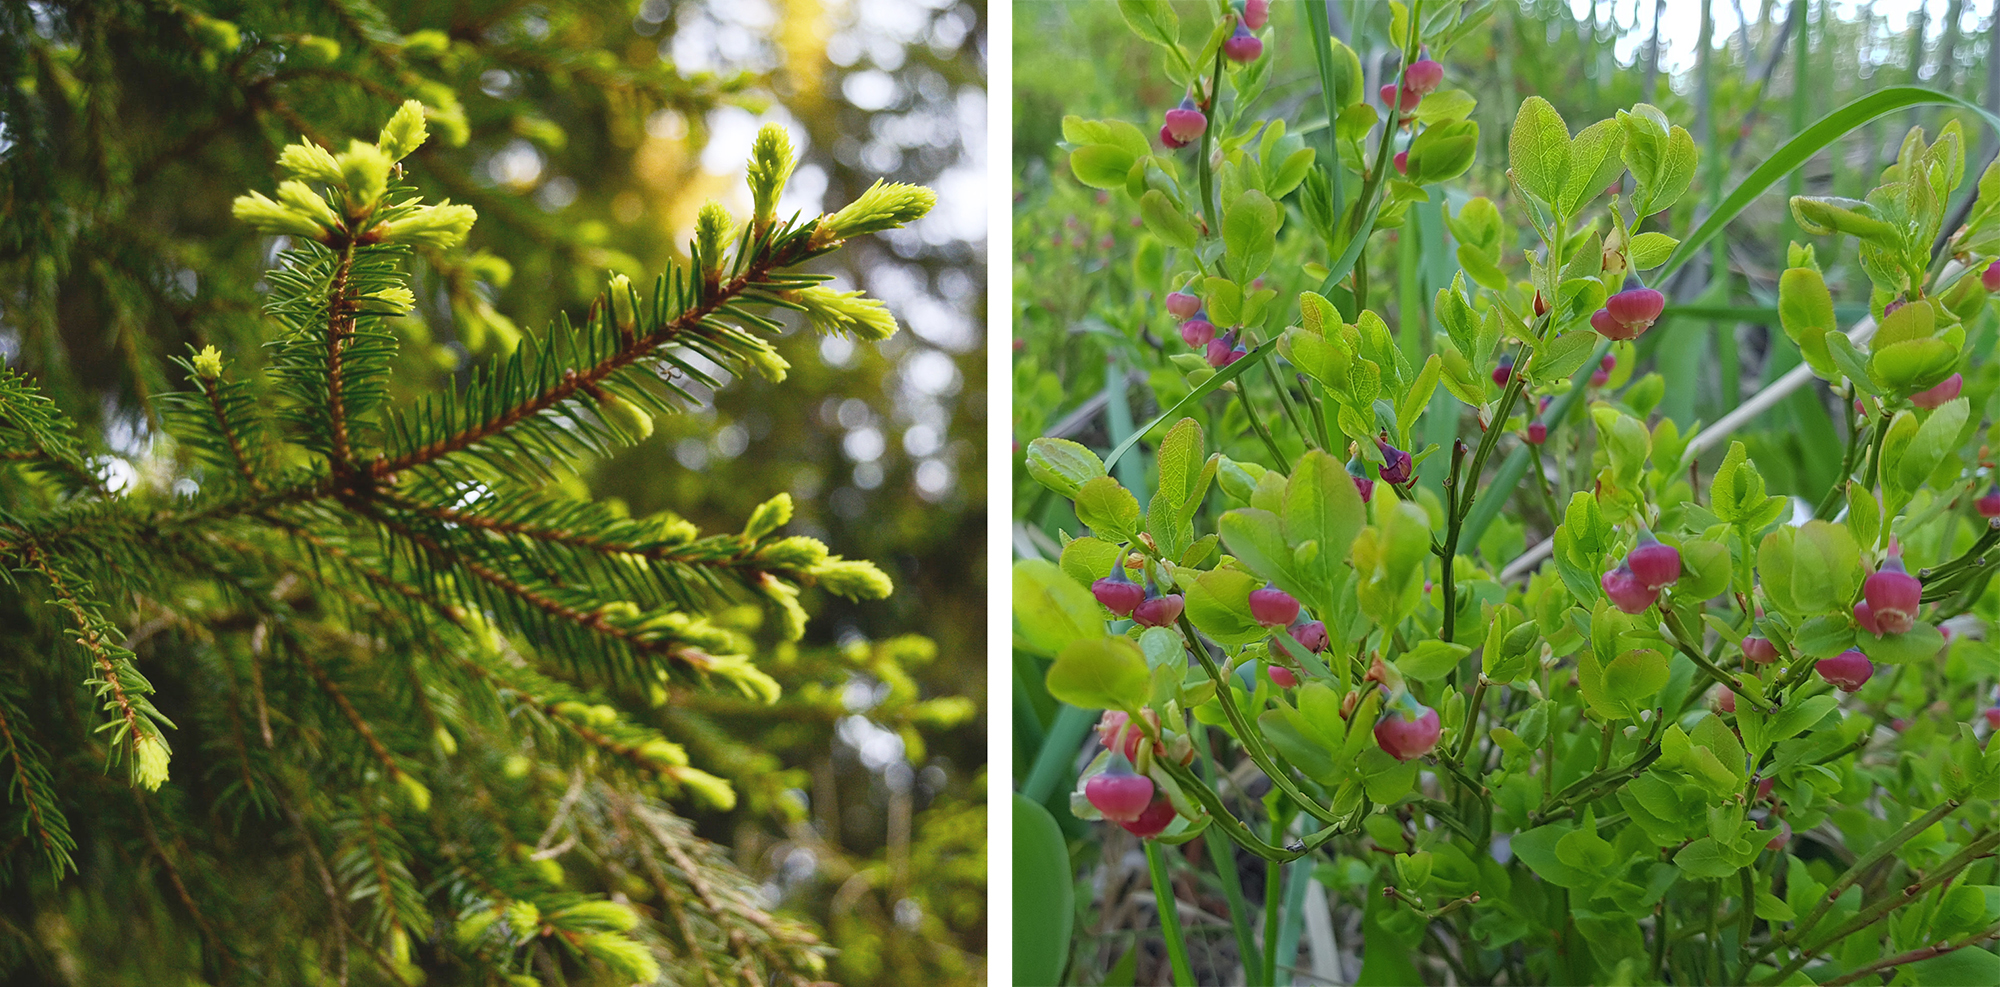 Spring spruce sprouts and blueberry flowers to eat wild herbs and feel refreshed and reborn